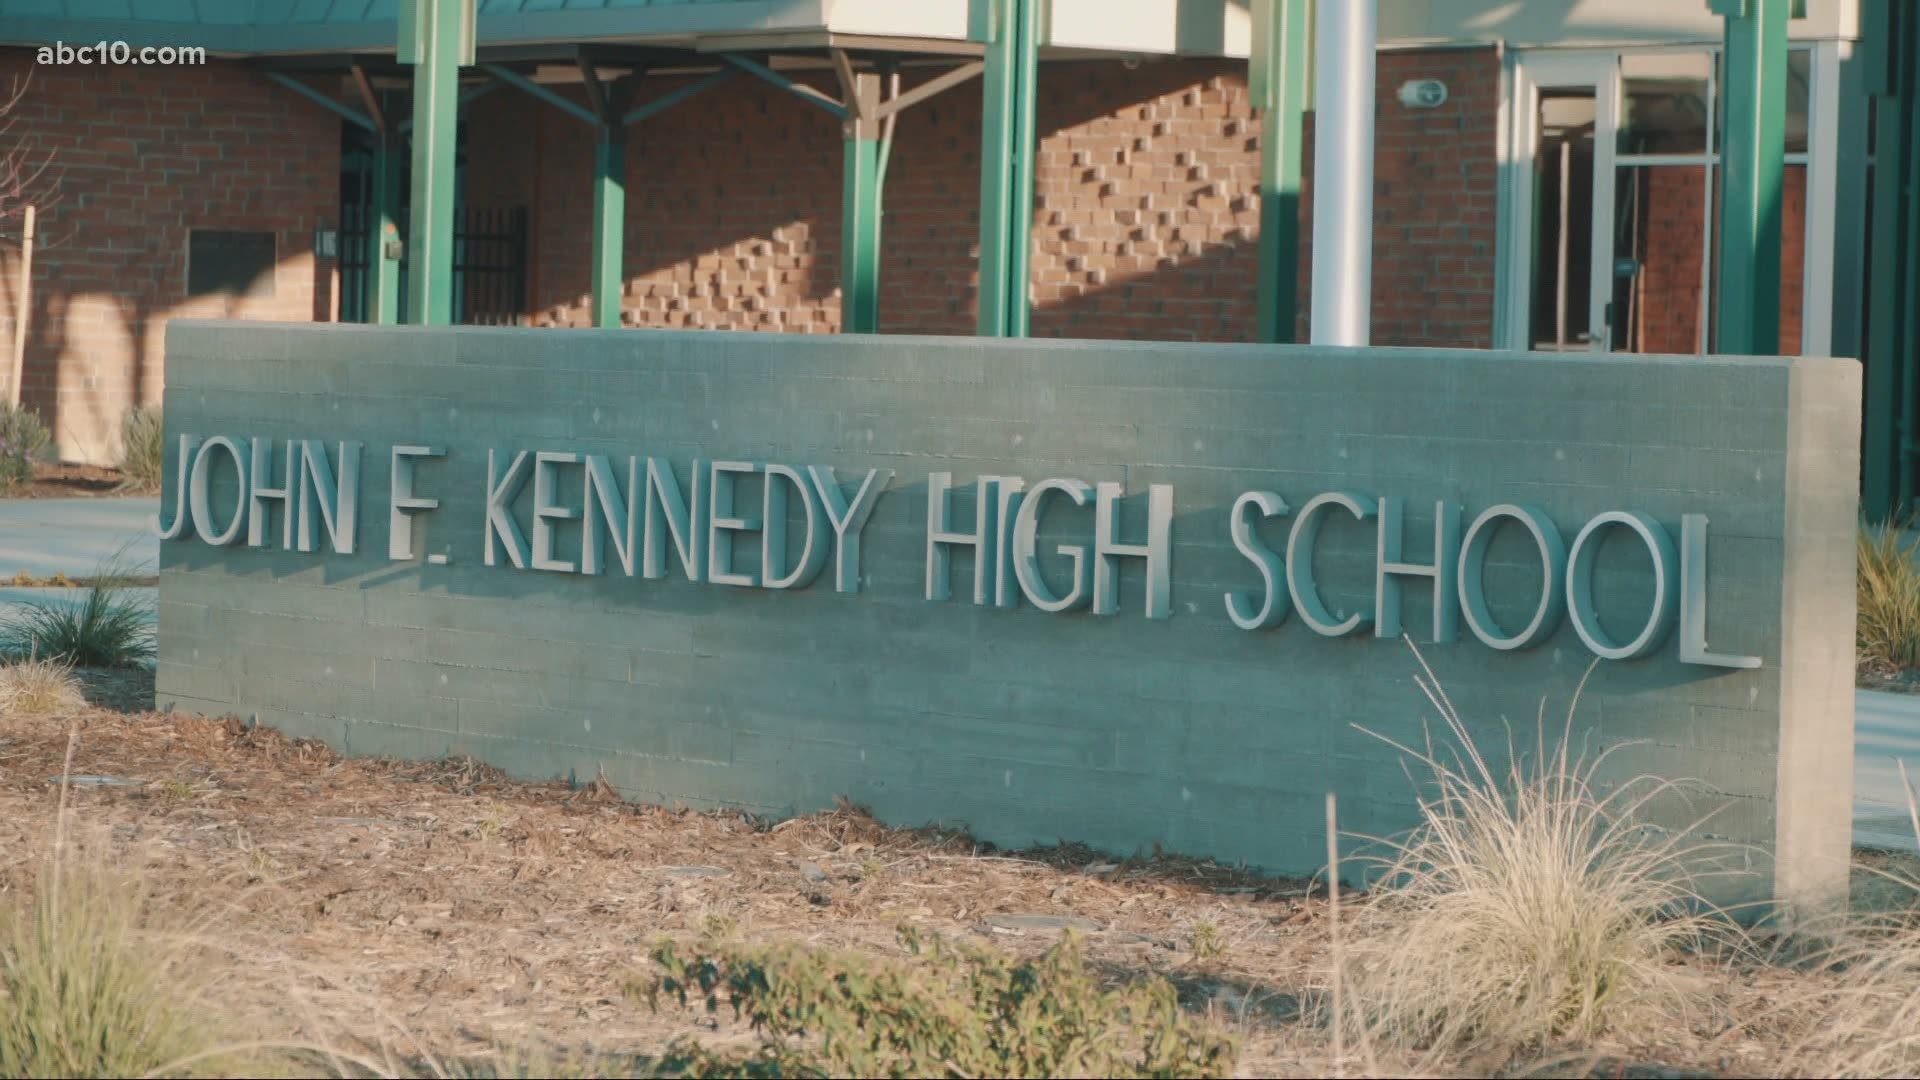 Sacramento City Unified School District confirmed a John F. Kennedy High School student-athlete needed medical aid during the game against Hiram Johnson High School.